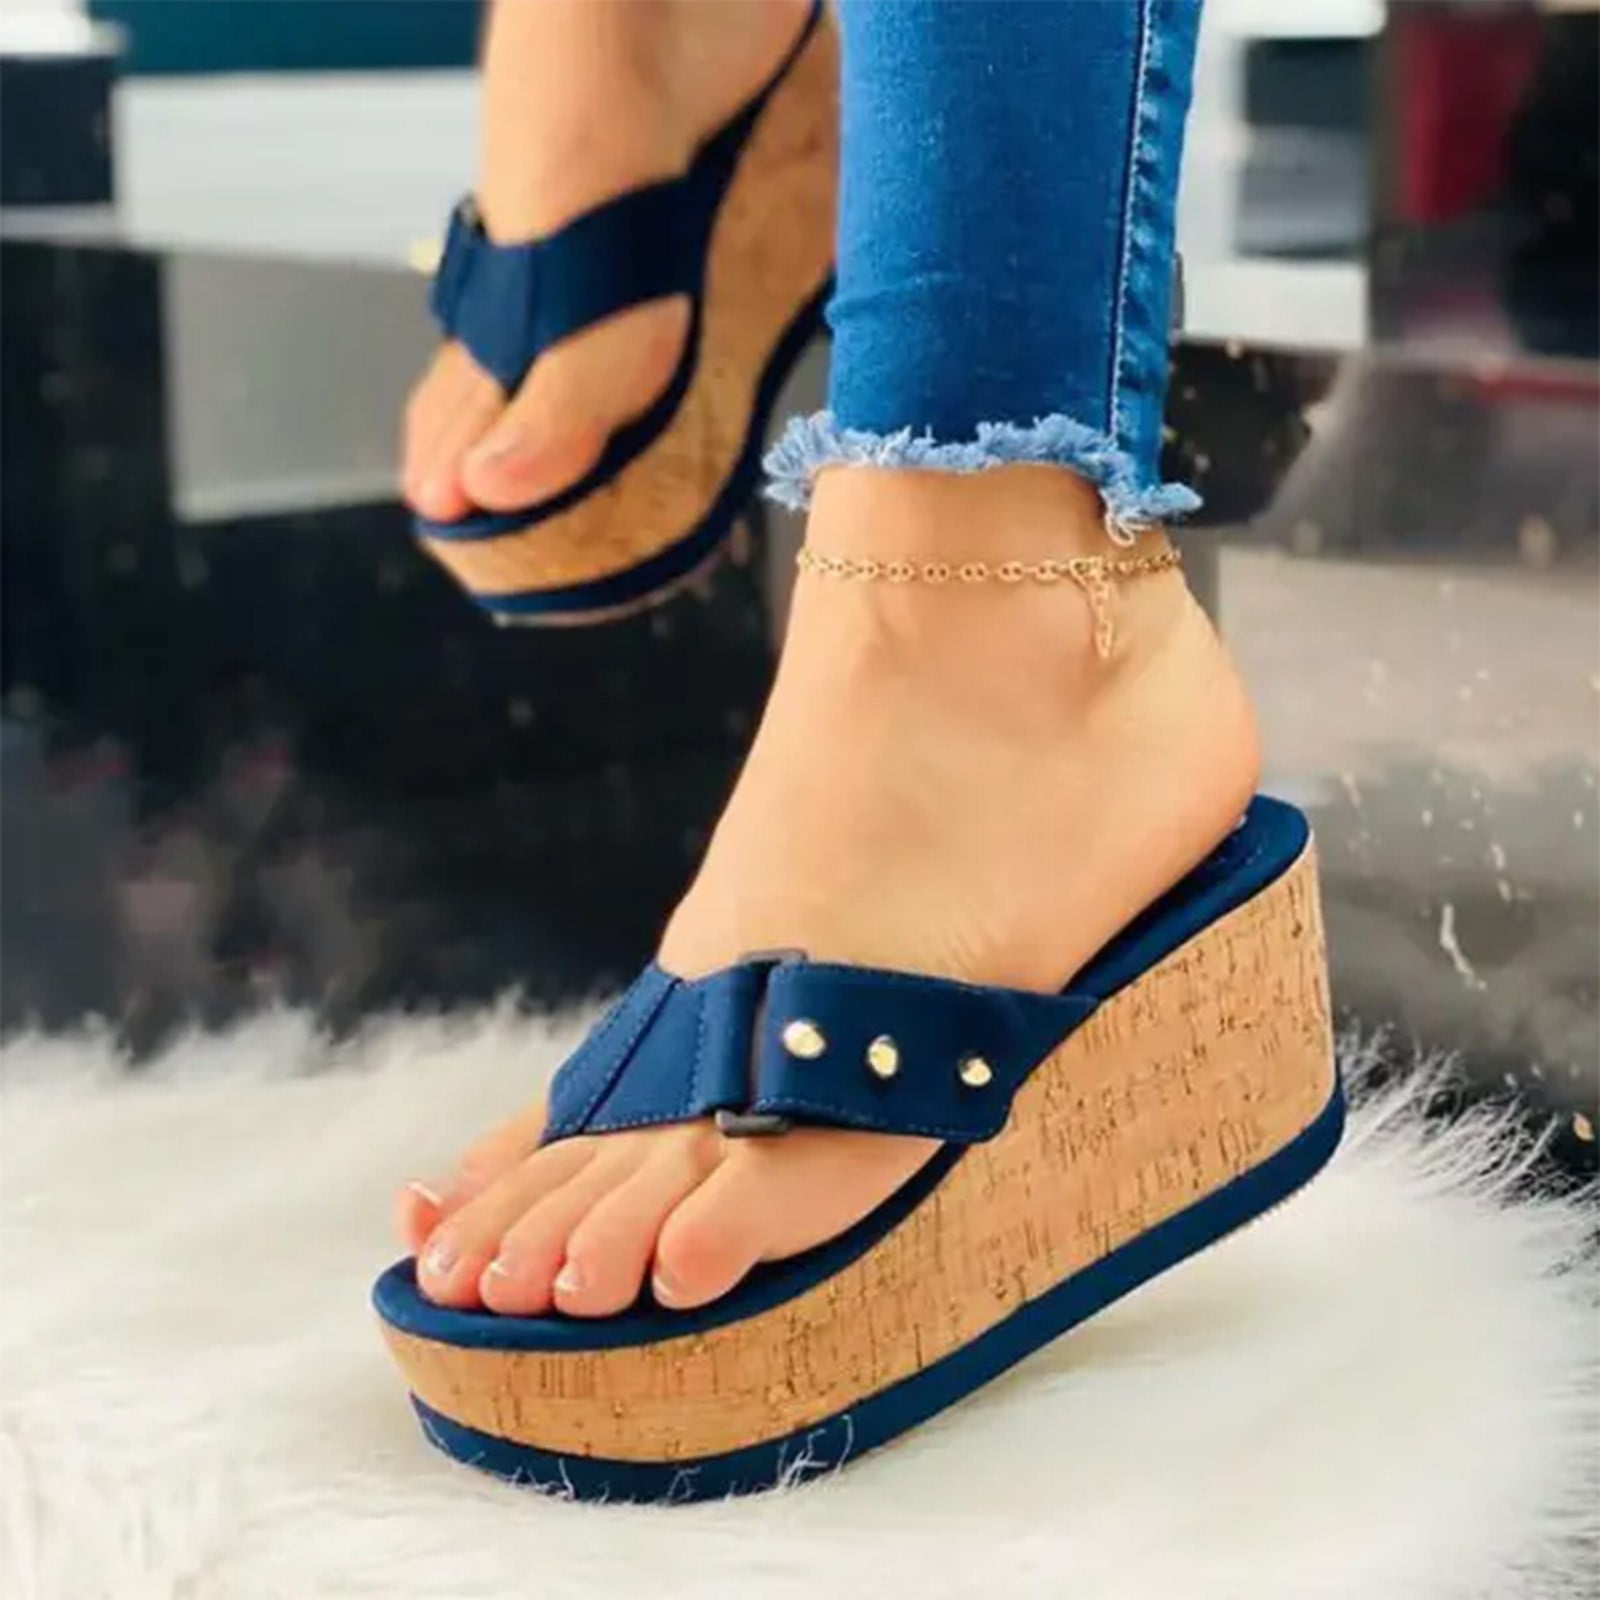 The Best Pair of Wedges for Spring/Summer - Andee Layne | Wedges outfit,  Dresses with wedges, Dress with wedges outfit